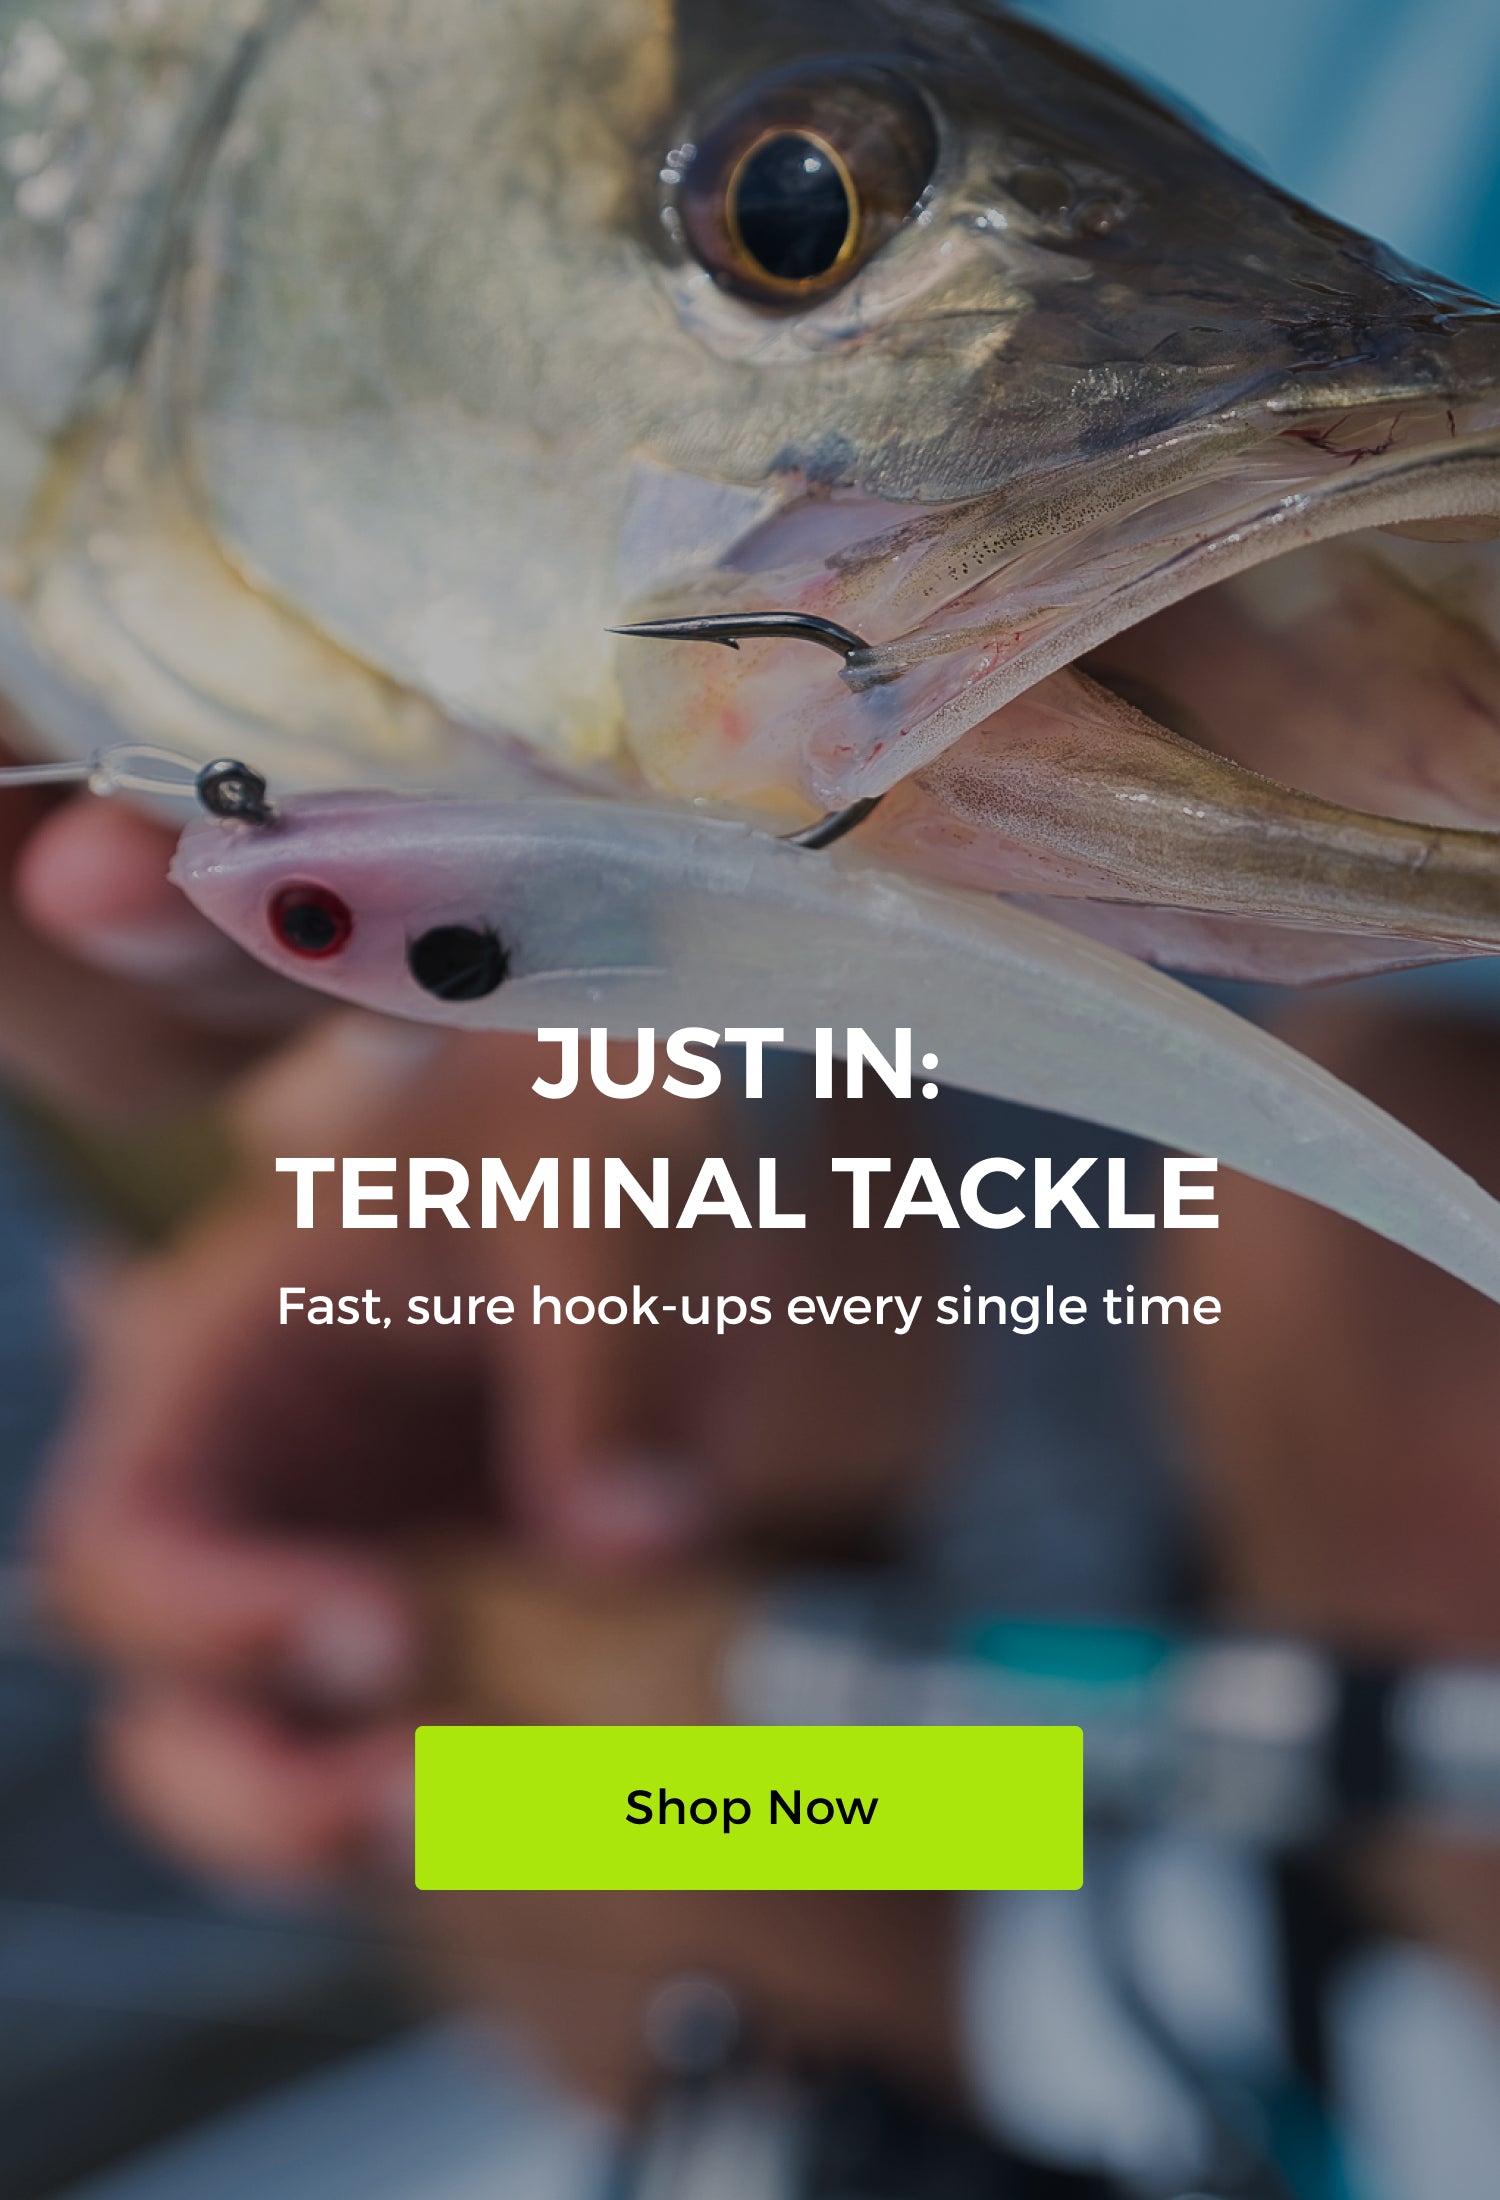 Tsunami Weighted Monofilament Trout Rig